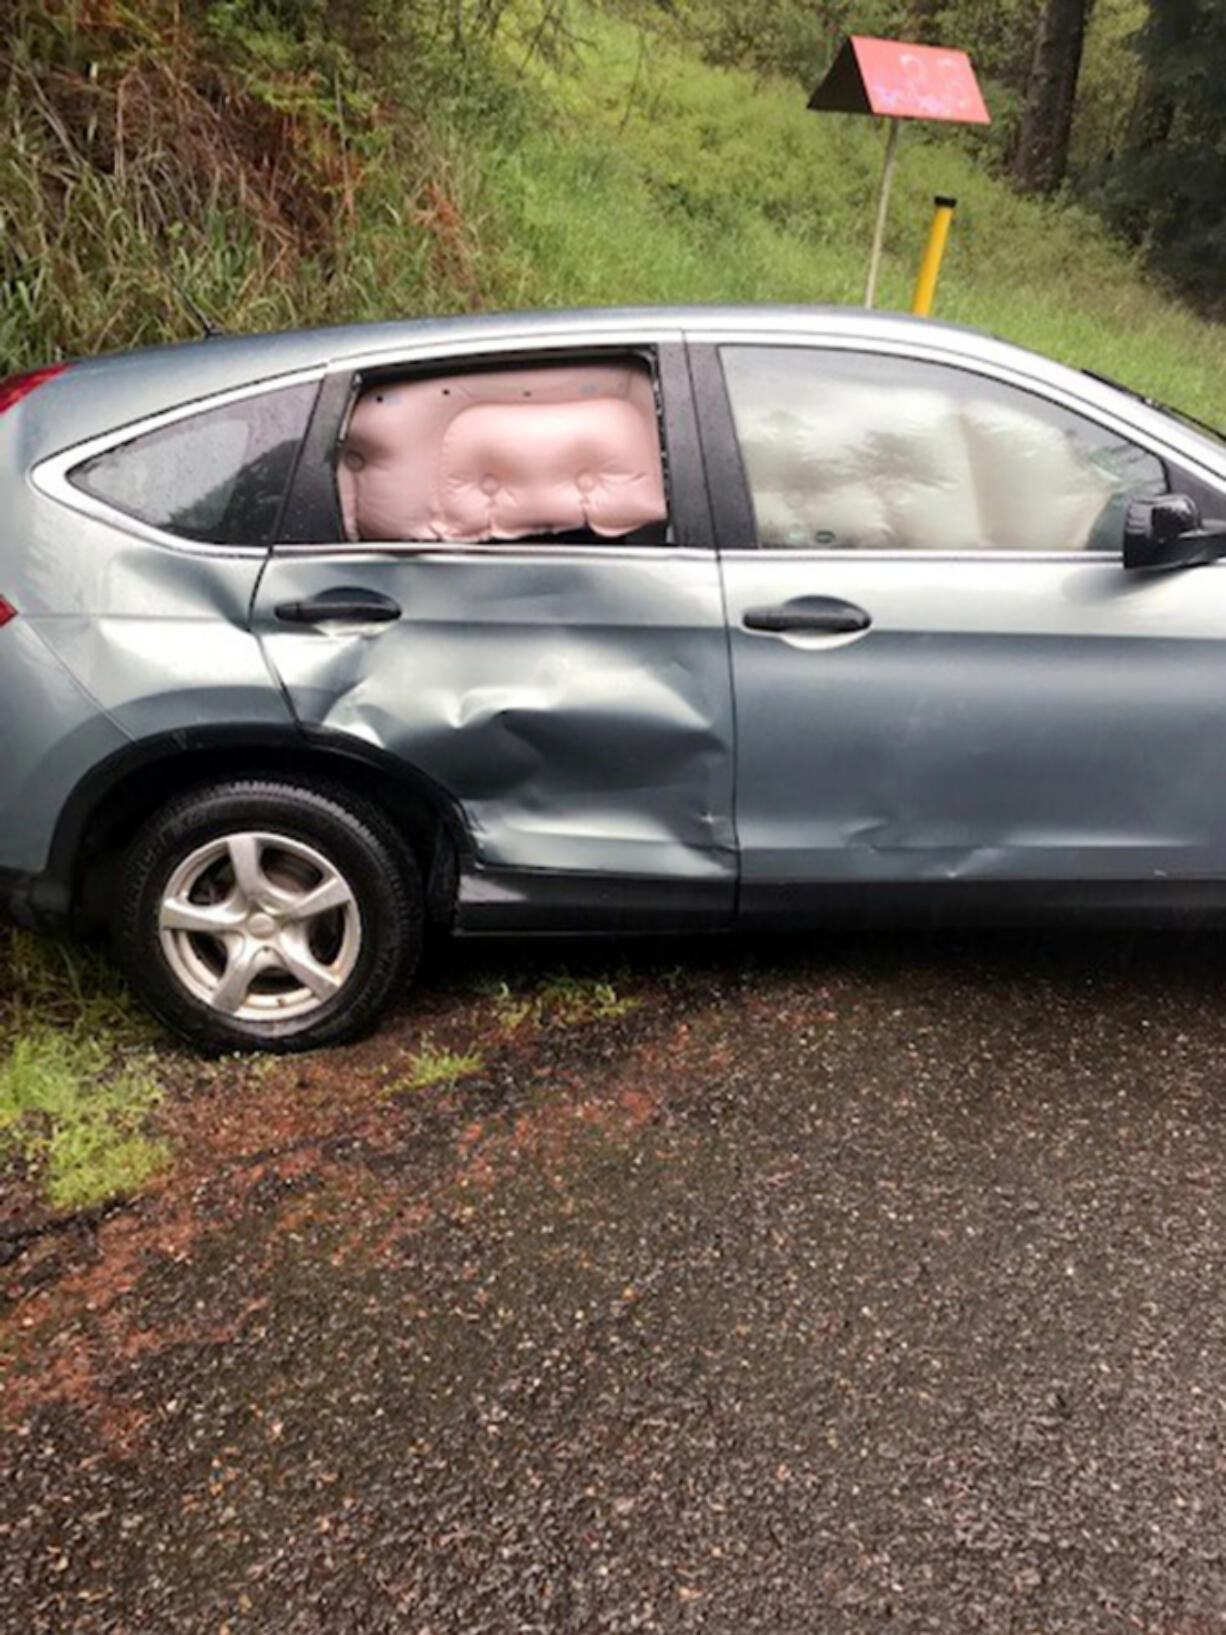 The SUV that Christopher Calvert, of Hermiston, Ore., allegedly evaded police in Thursday afternoon before crashing into a ditch. The Kennewick Police Department said the vehicle was stolen from 76-year-old Clayton Wick, of Kennewick, whom Calvert is also suspected of killing.